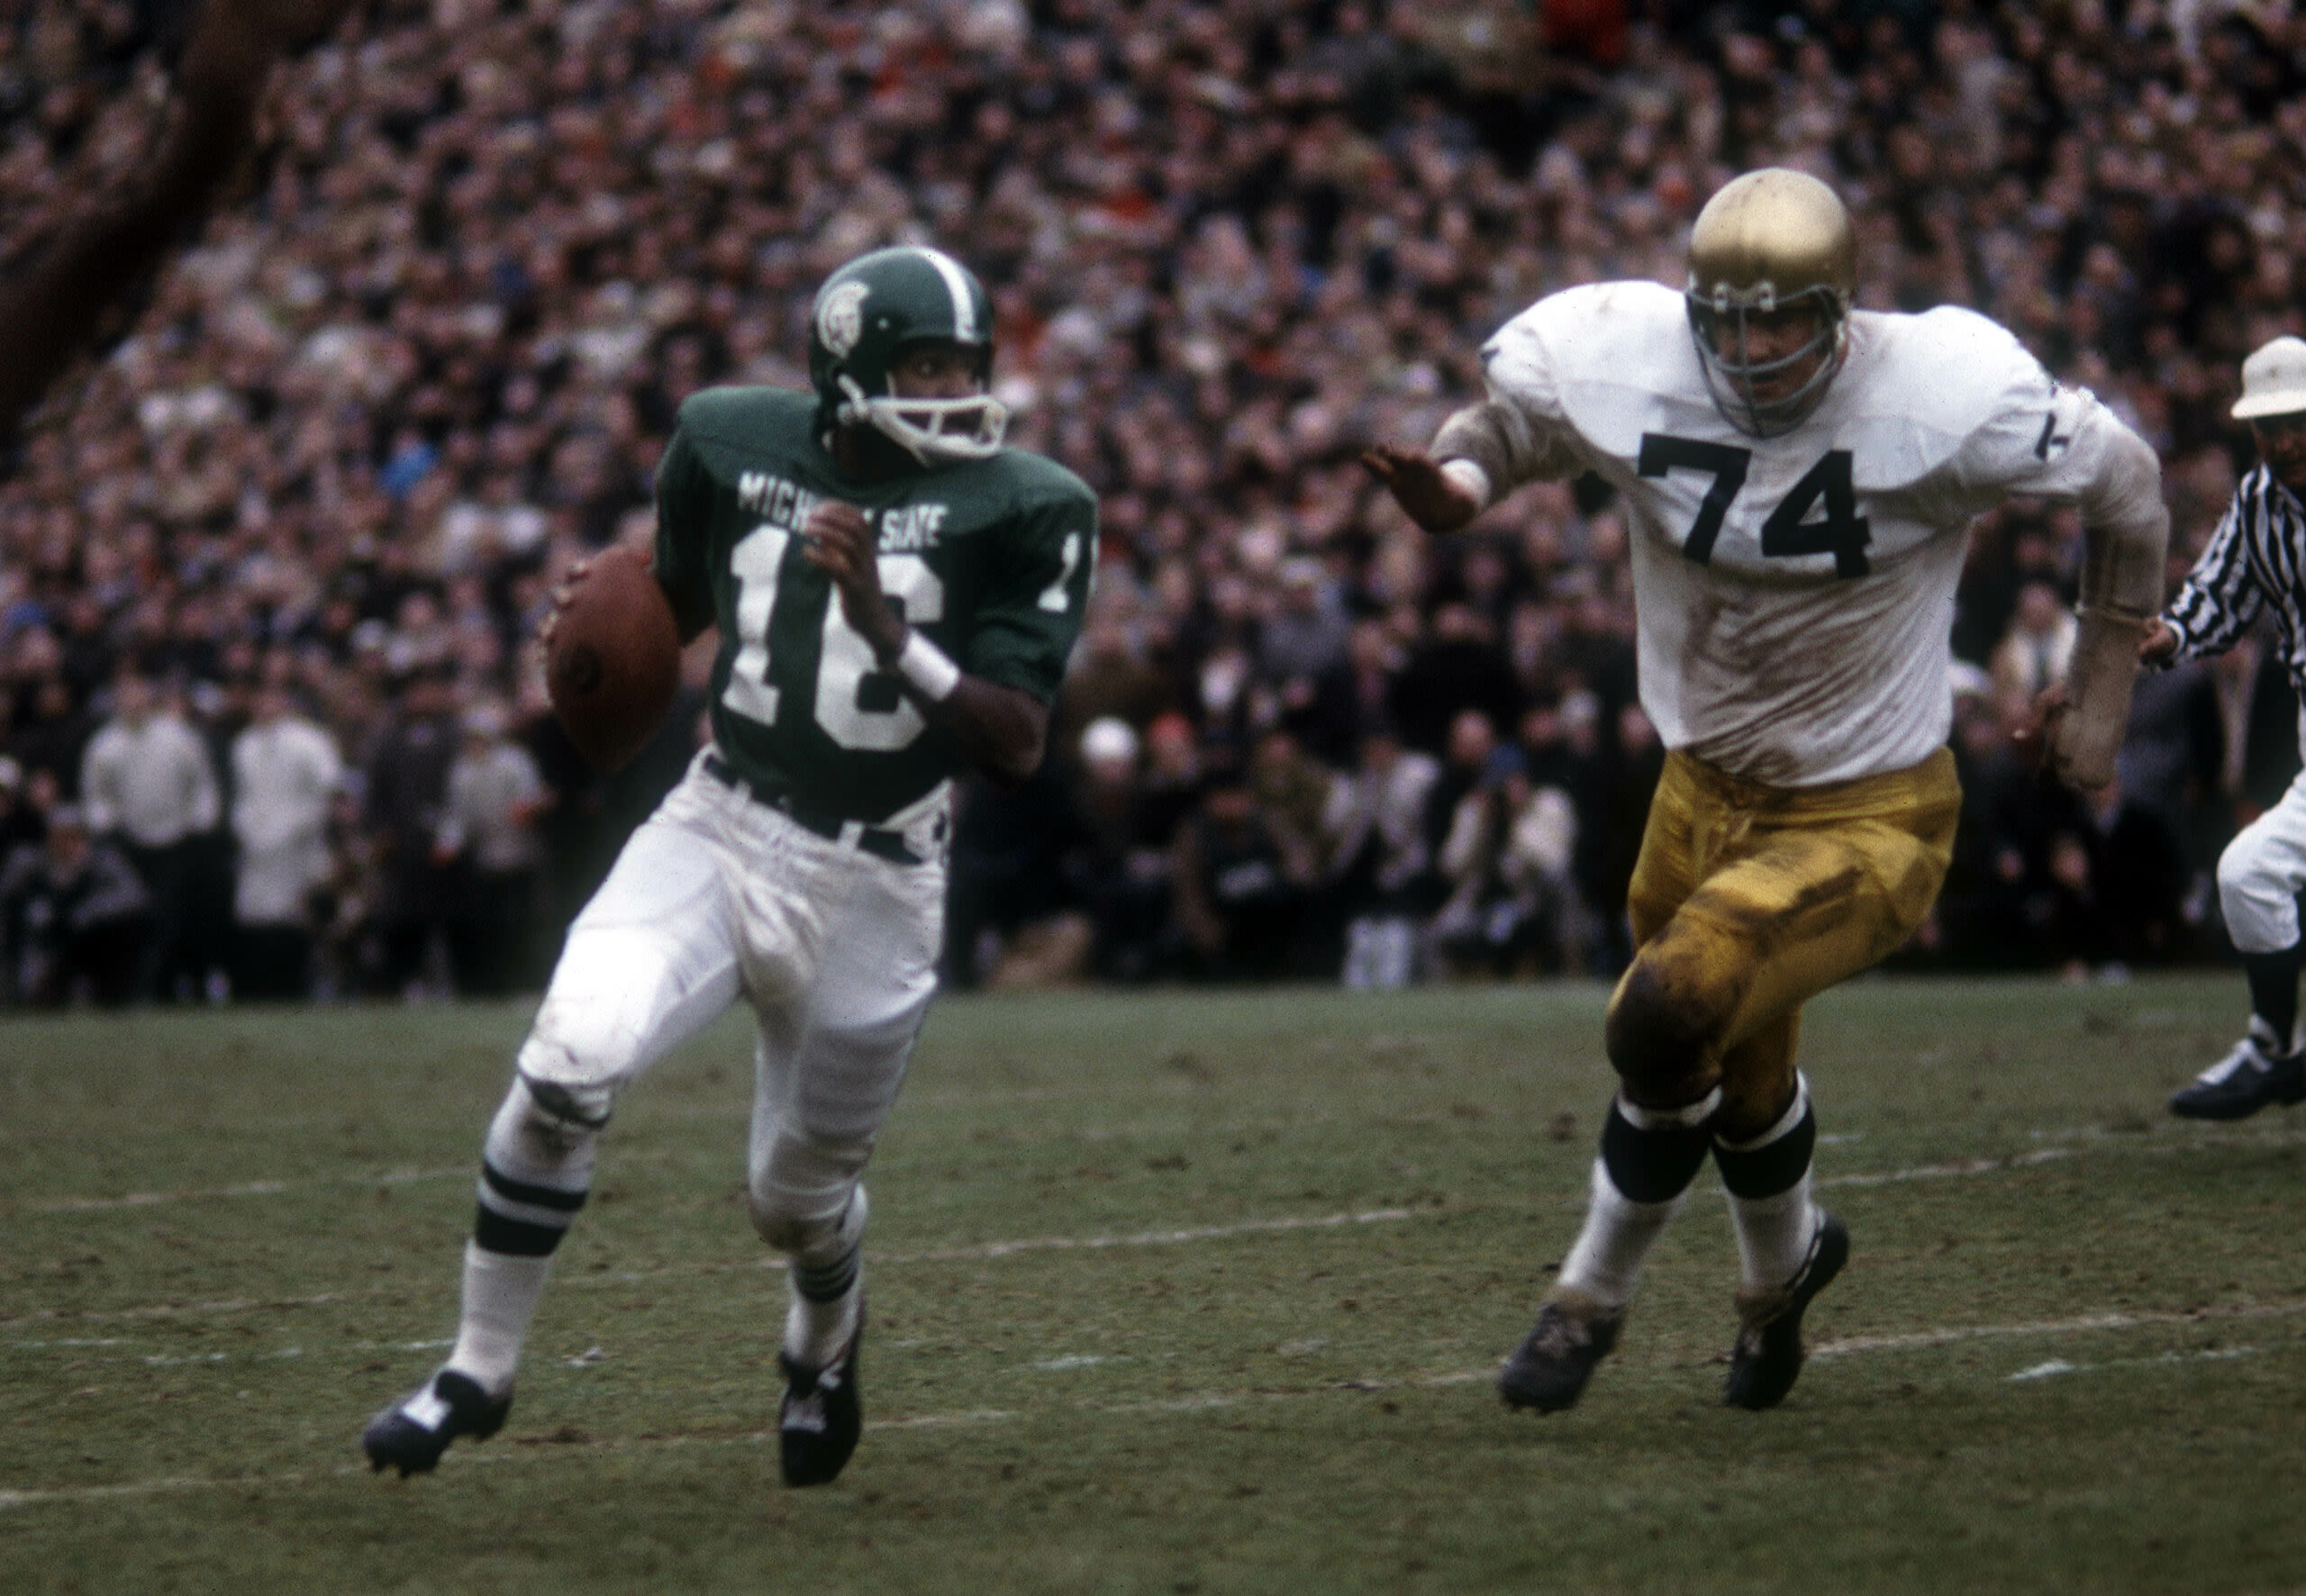 All-Time Notre Dame Athlete Dies at 78